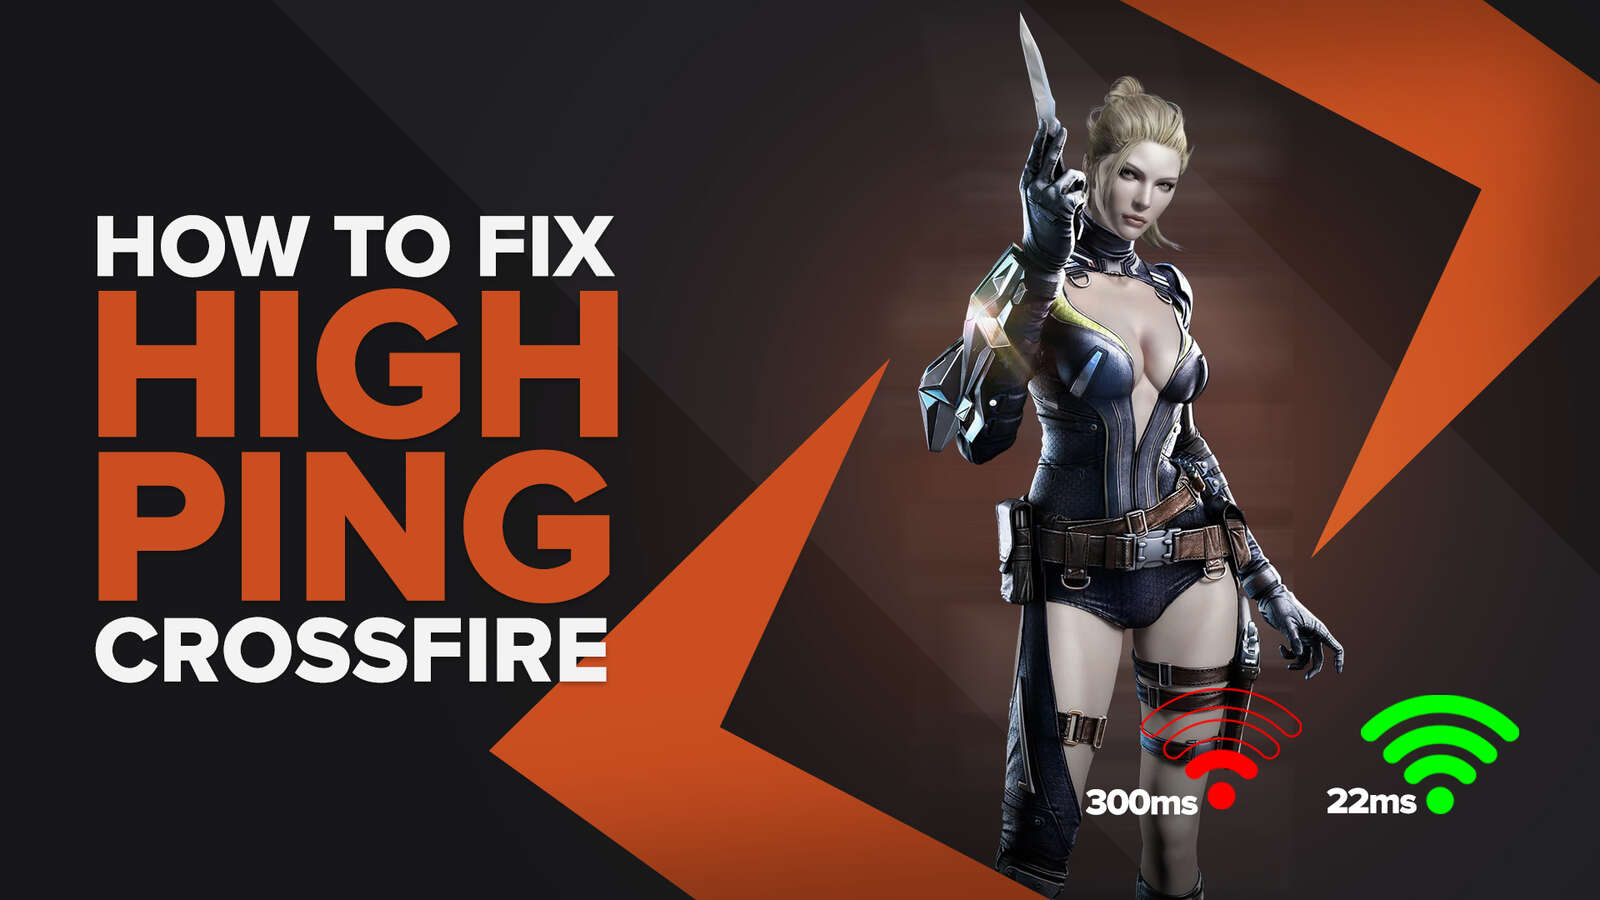 How to fix your High Ping in CrossFire in a few clicks